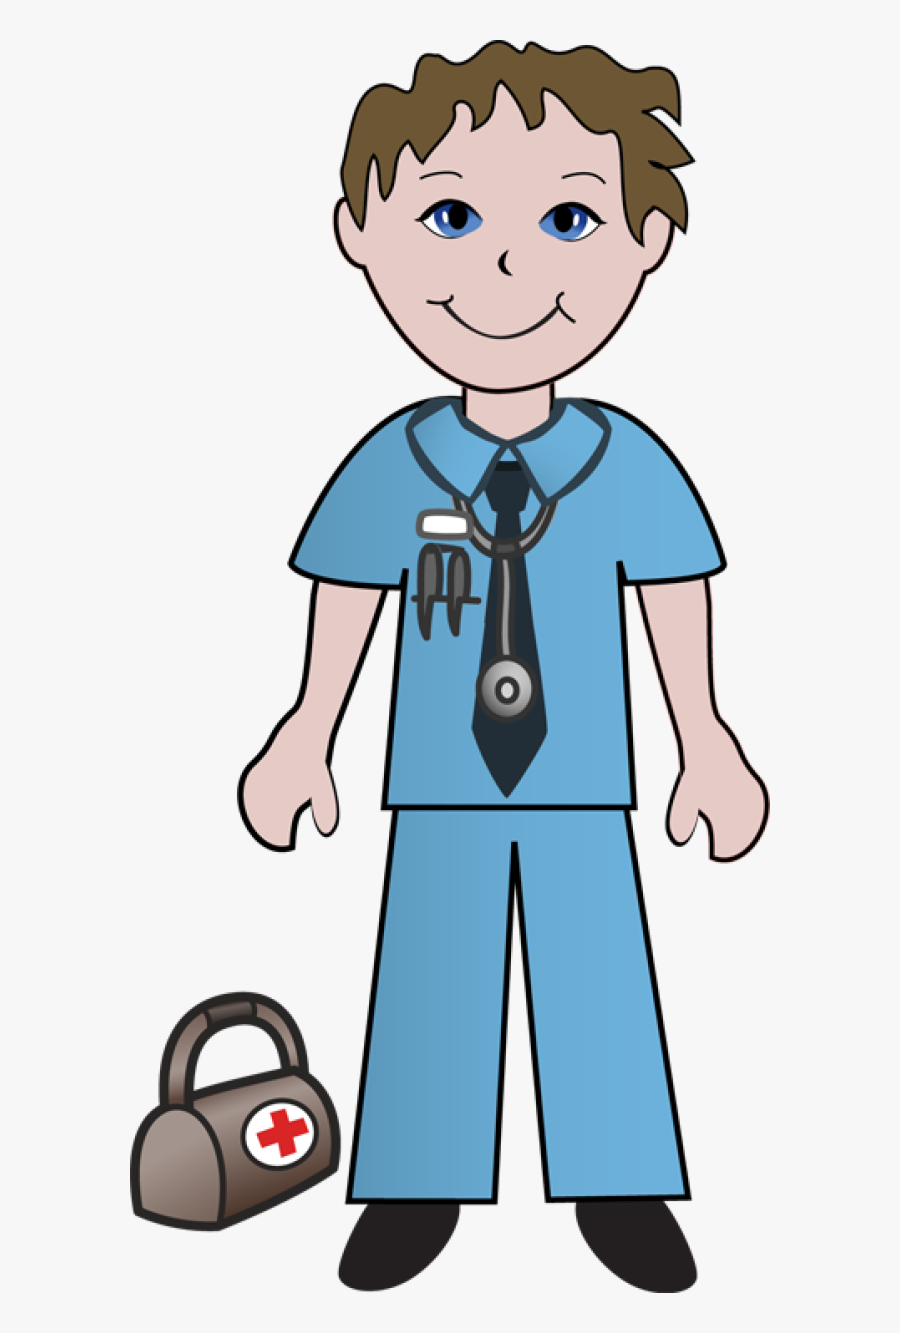 Clipart Of Doctor, Doctors And Ready - Nurse Clipart Black And White ...